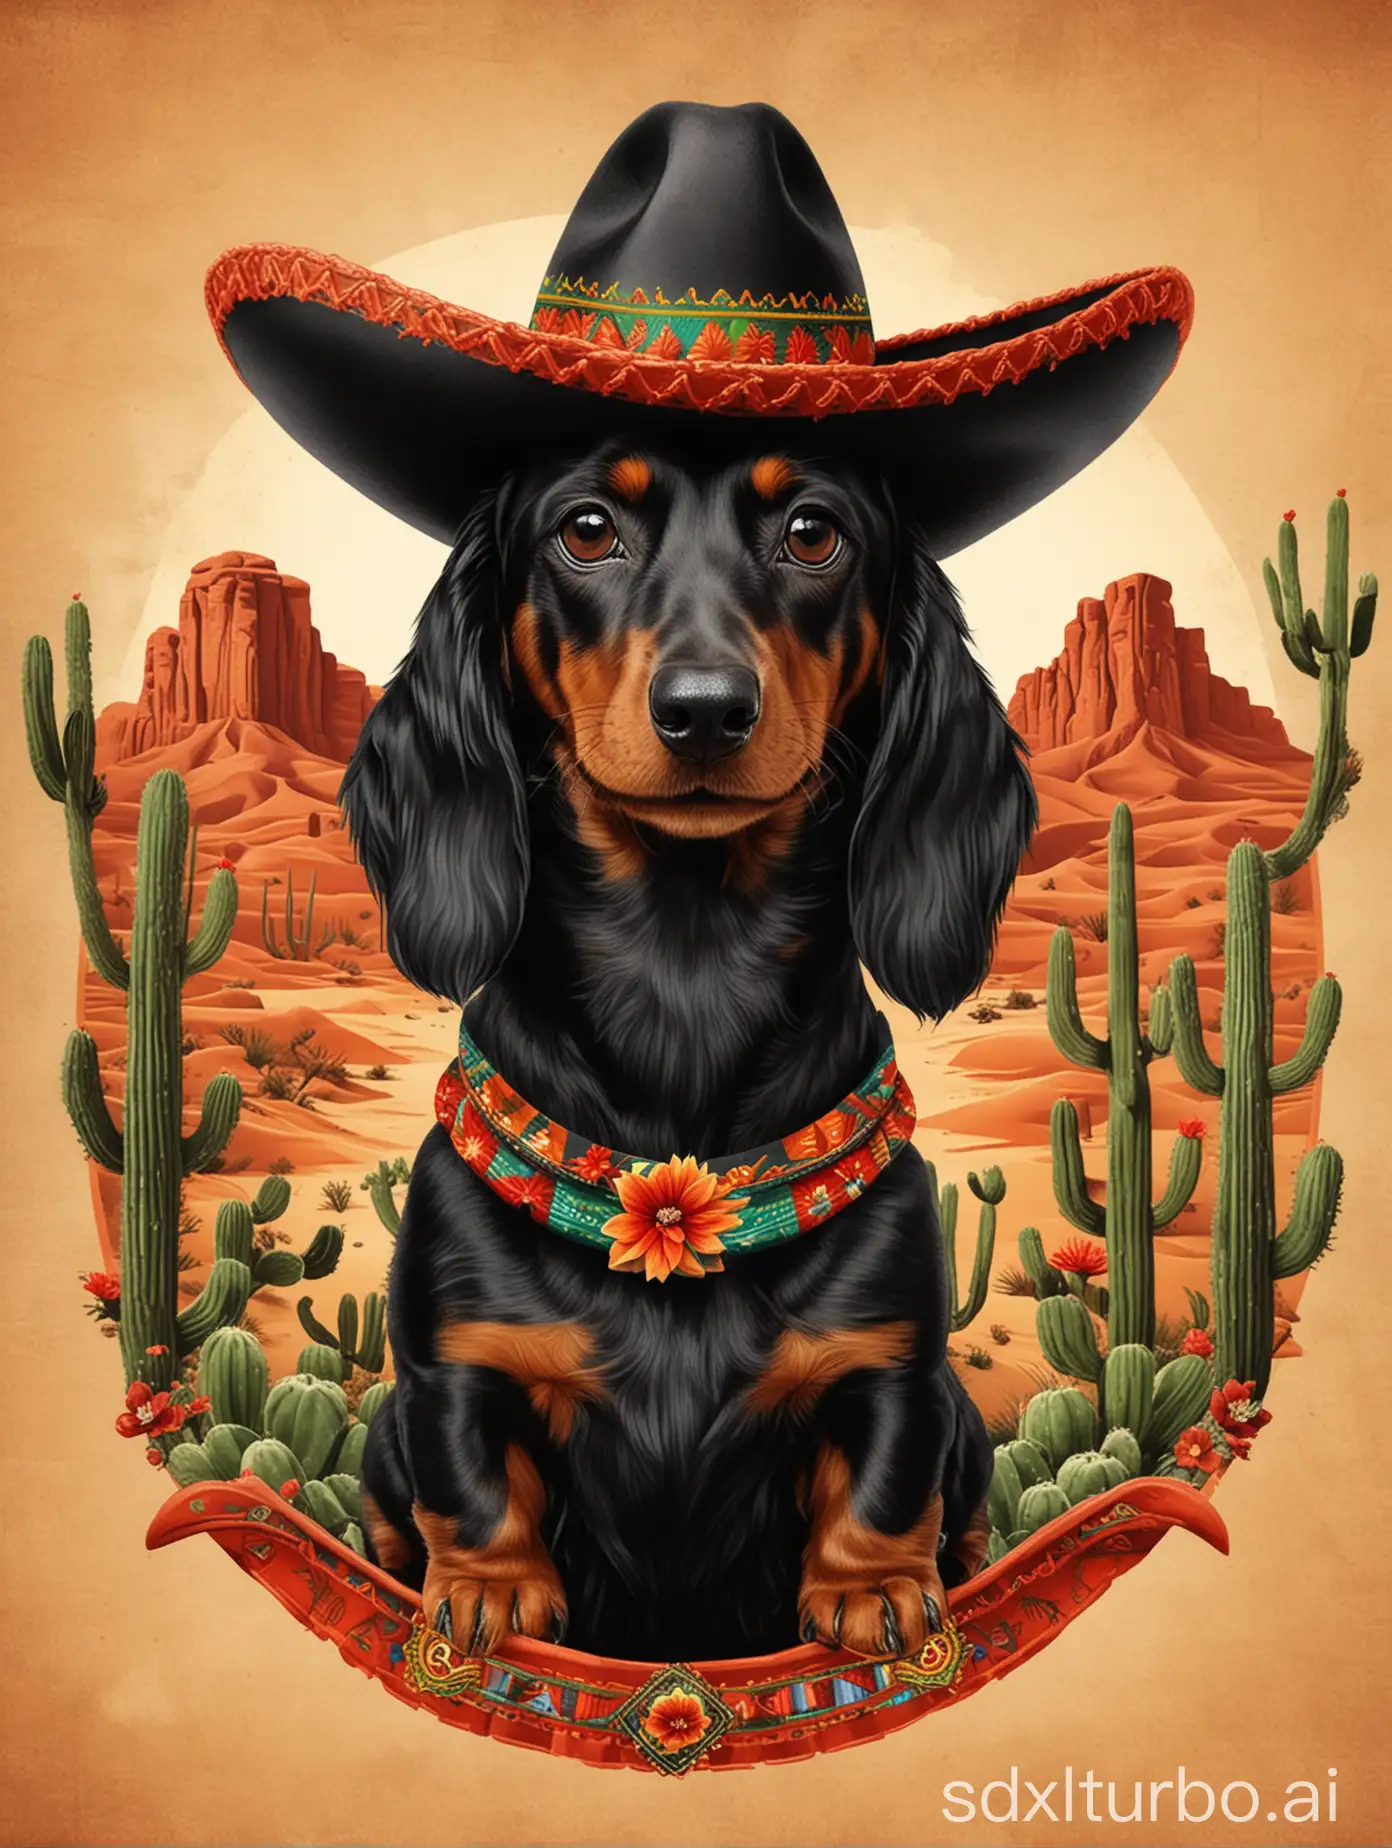 Logotype of black dachshund with Mexican hat, cactus and desert background